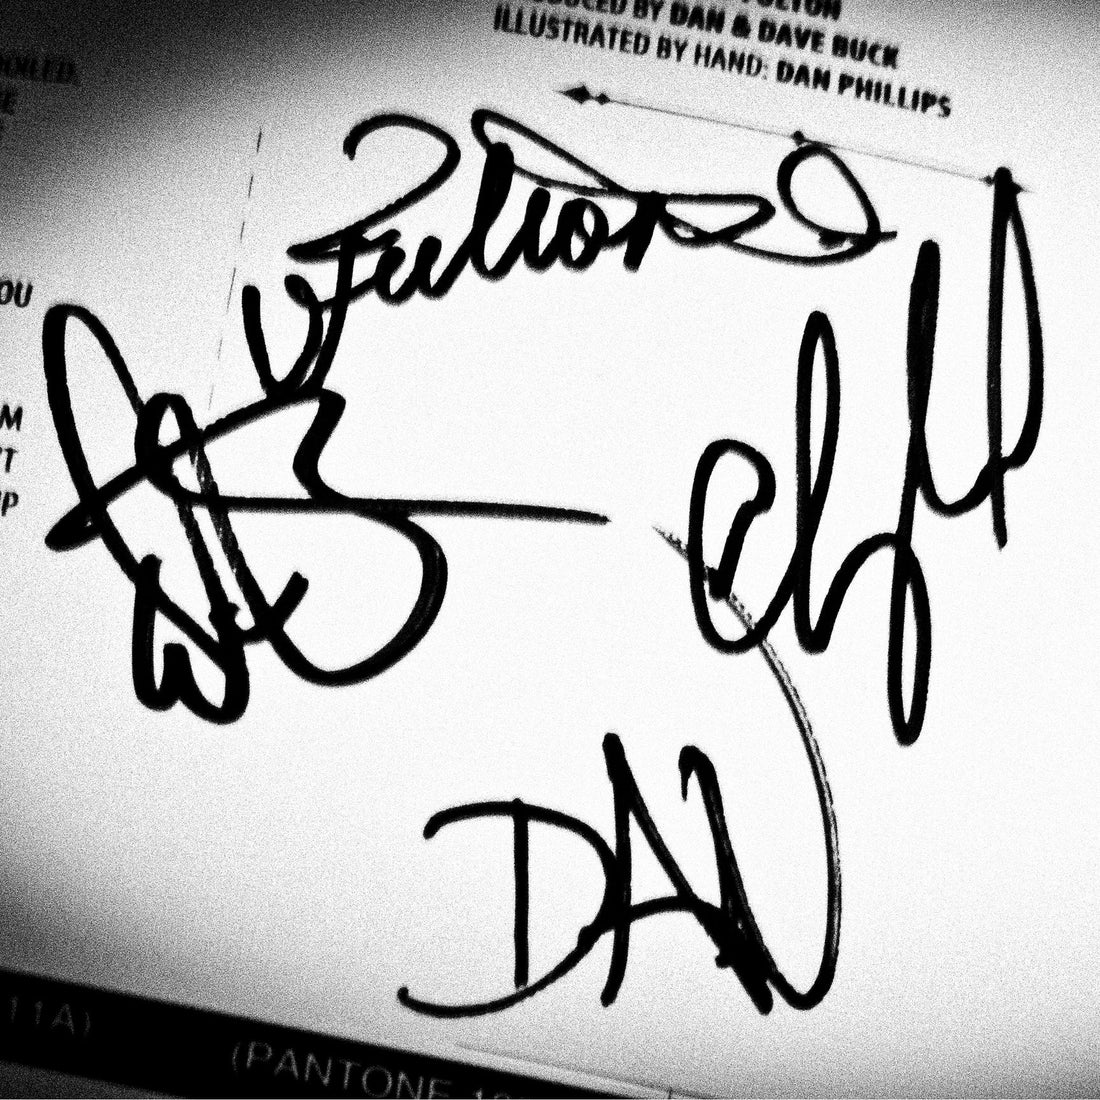 Fulton Clip Joint Uncut Sheet Signed By Fulton And Dan &amp; Dave Buck